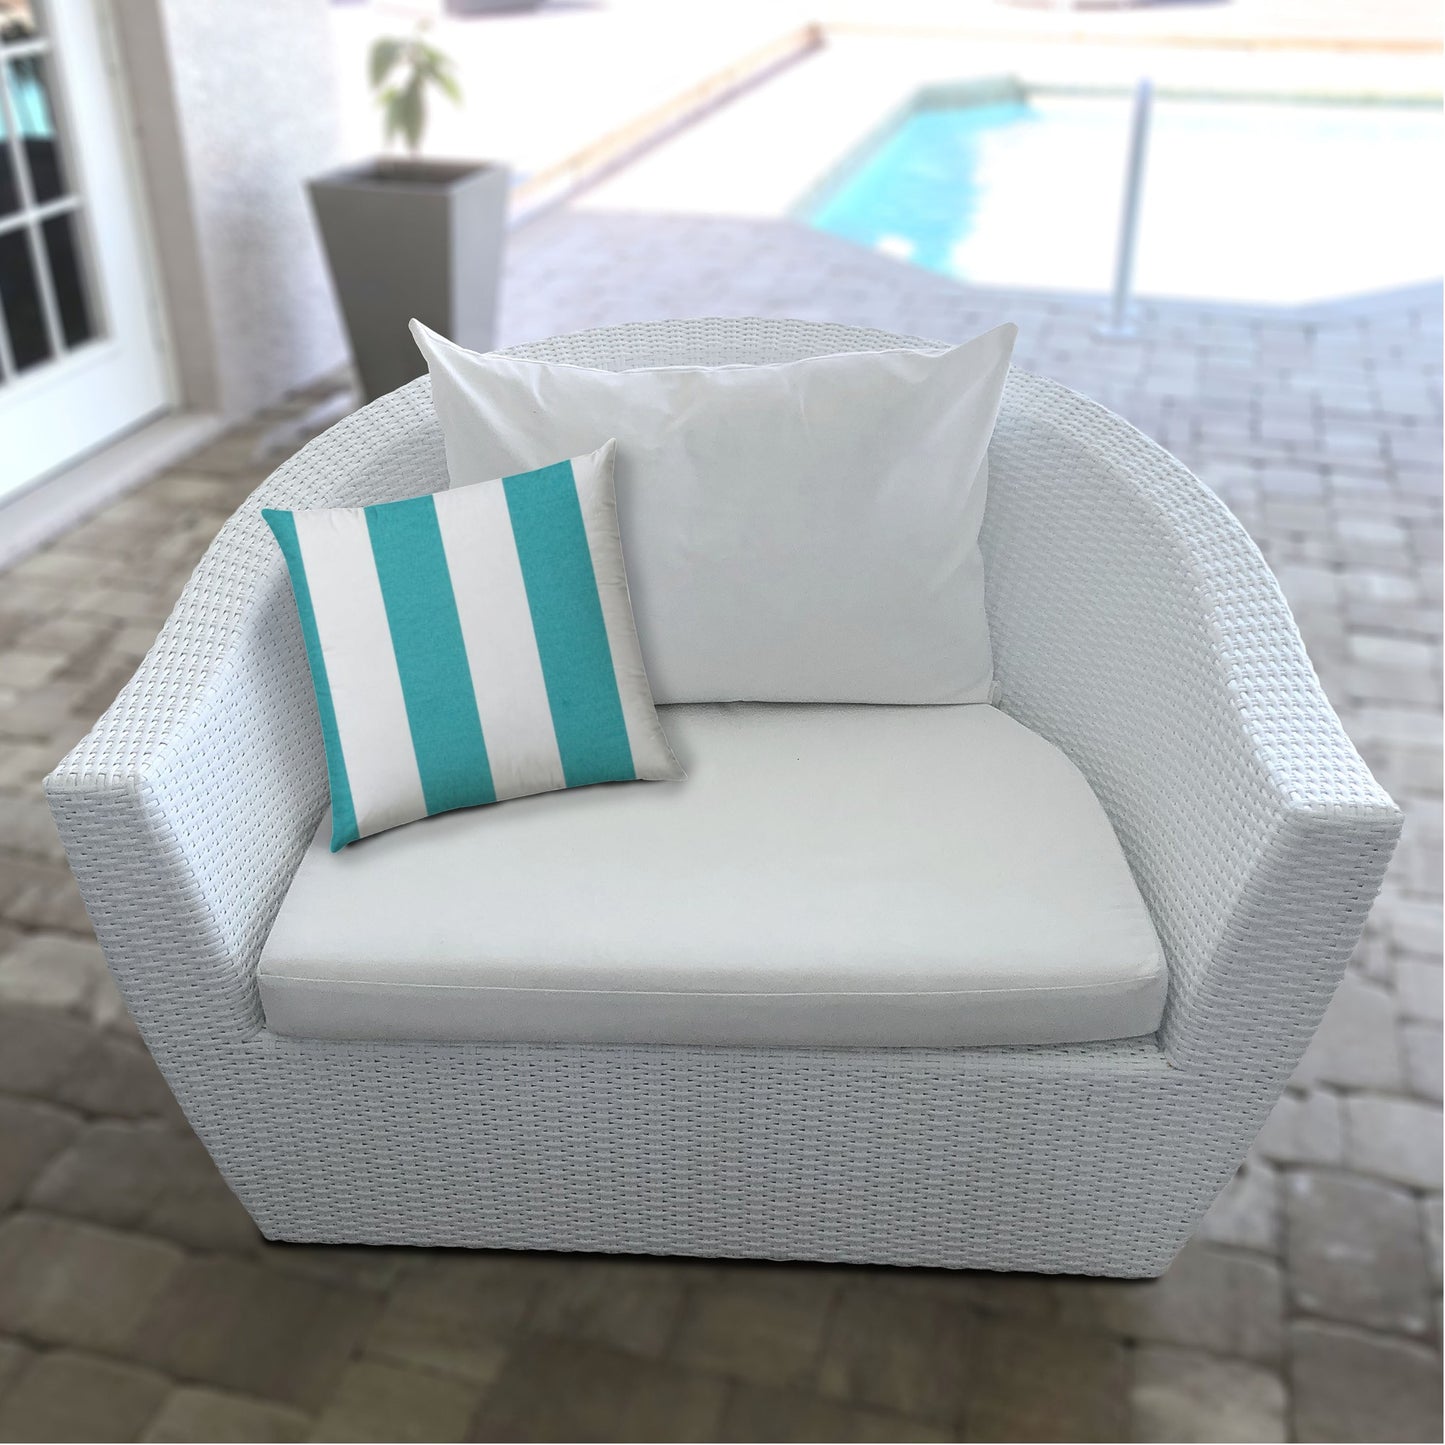 17" X 17" Turquoise And White Blown Seam Striped Lumbar Indoor Outdoor Pillow